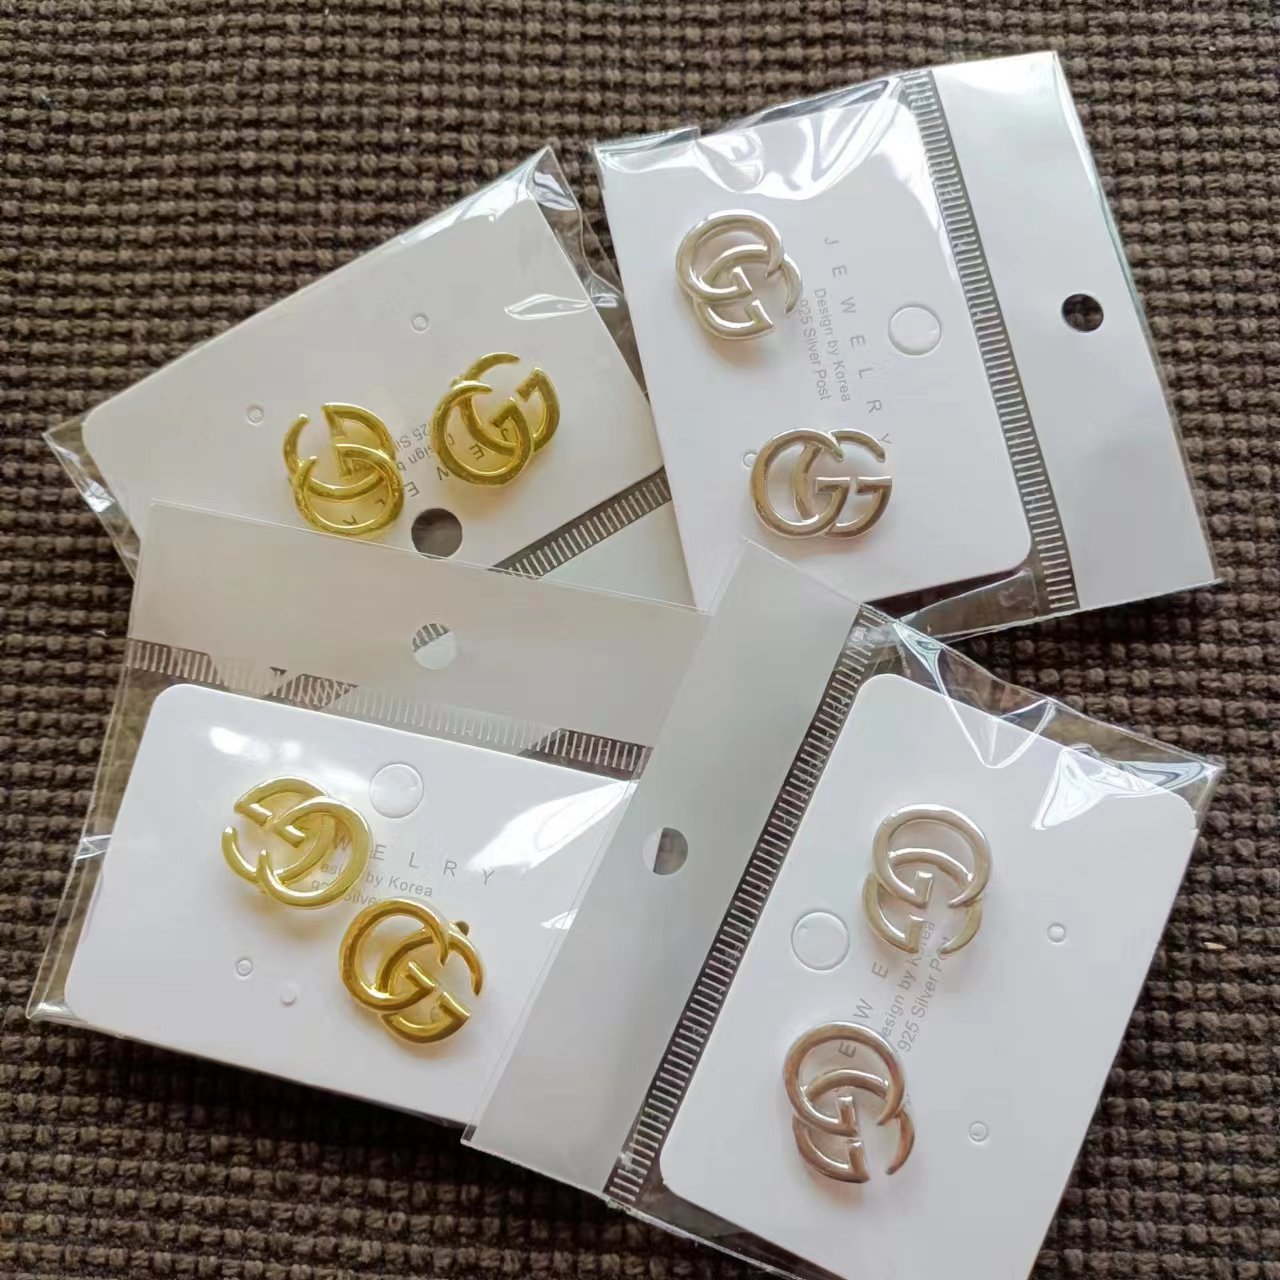 Special sale! New GUCCI GG earrings